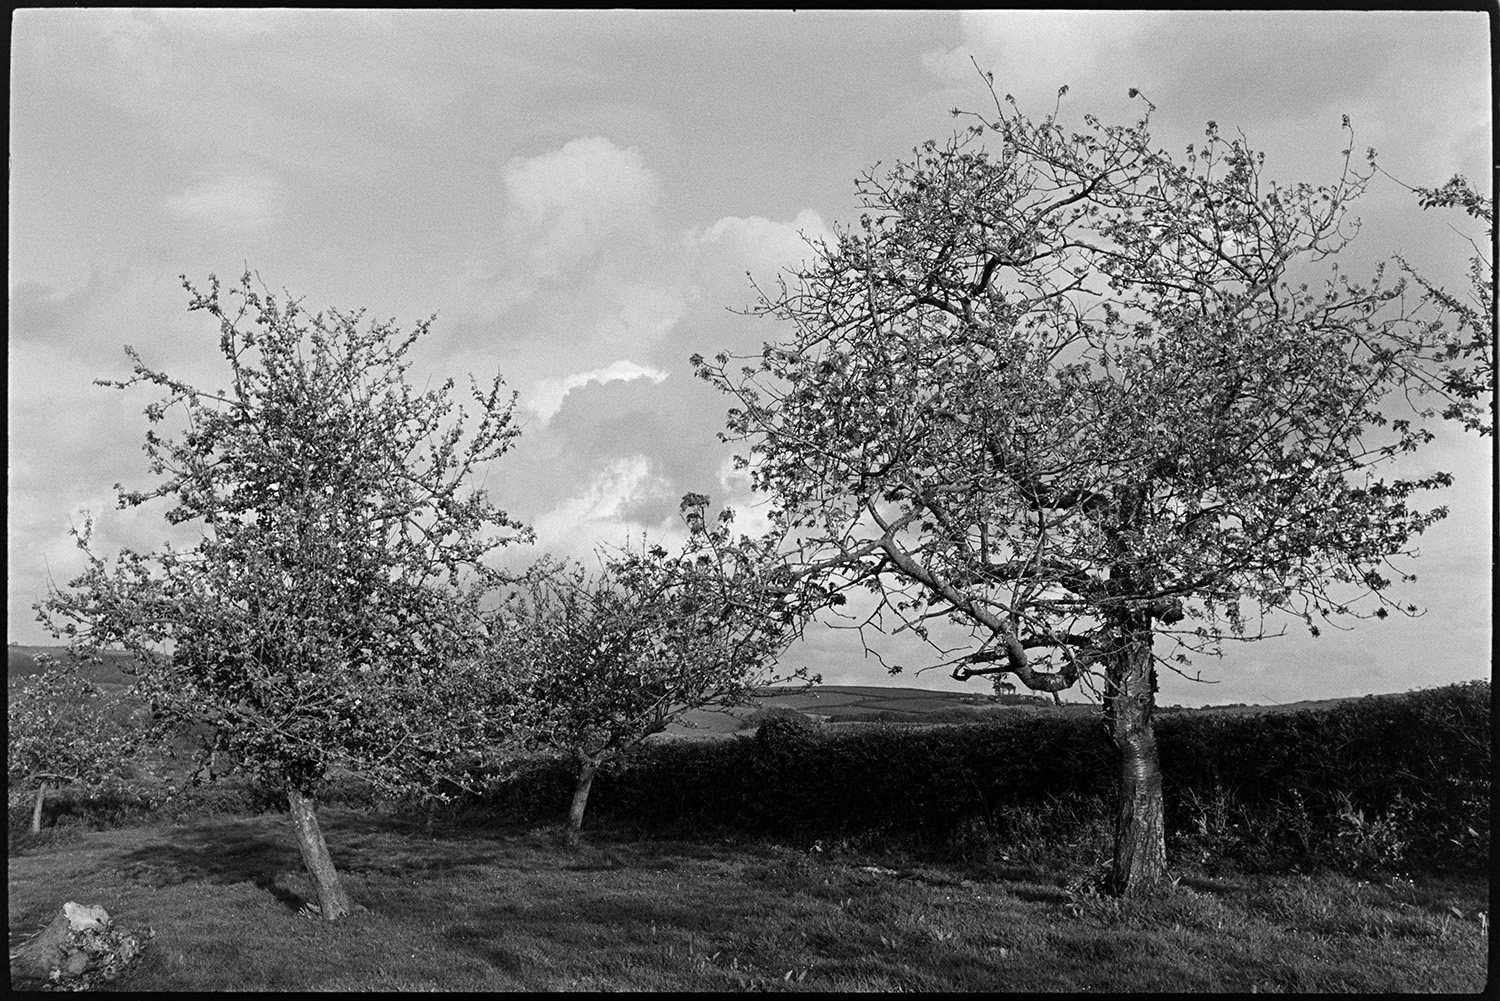 Orchards, mazzard cherry trees in old orchard.
[Mazzard cherry trees in an old orchard near Atherington.]